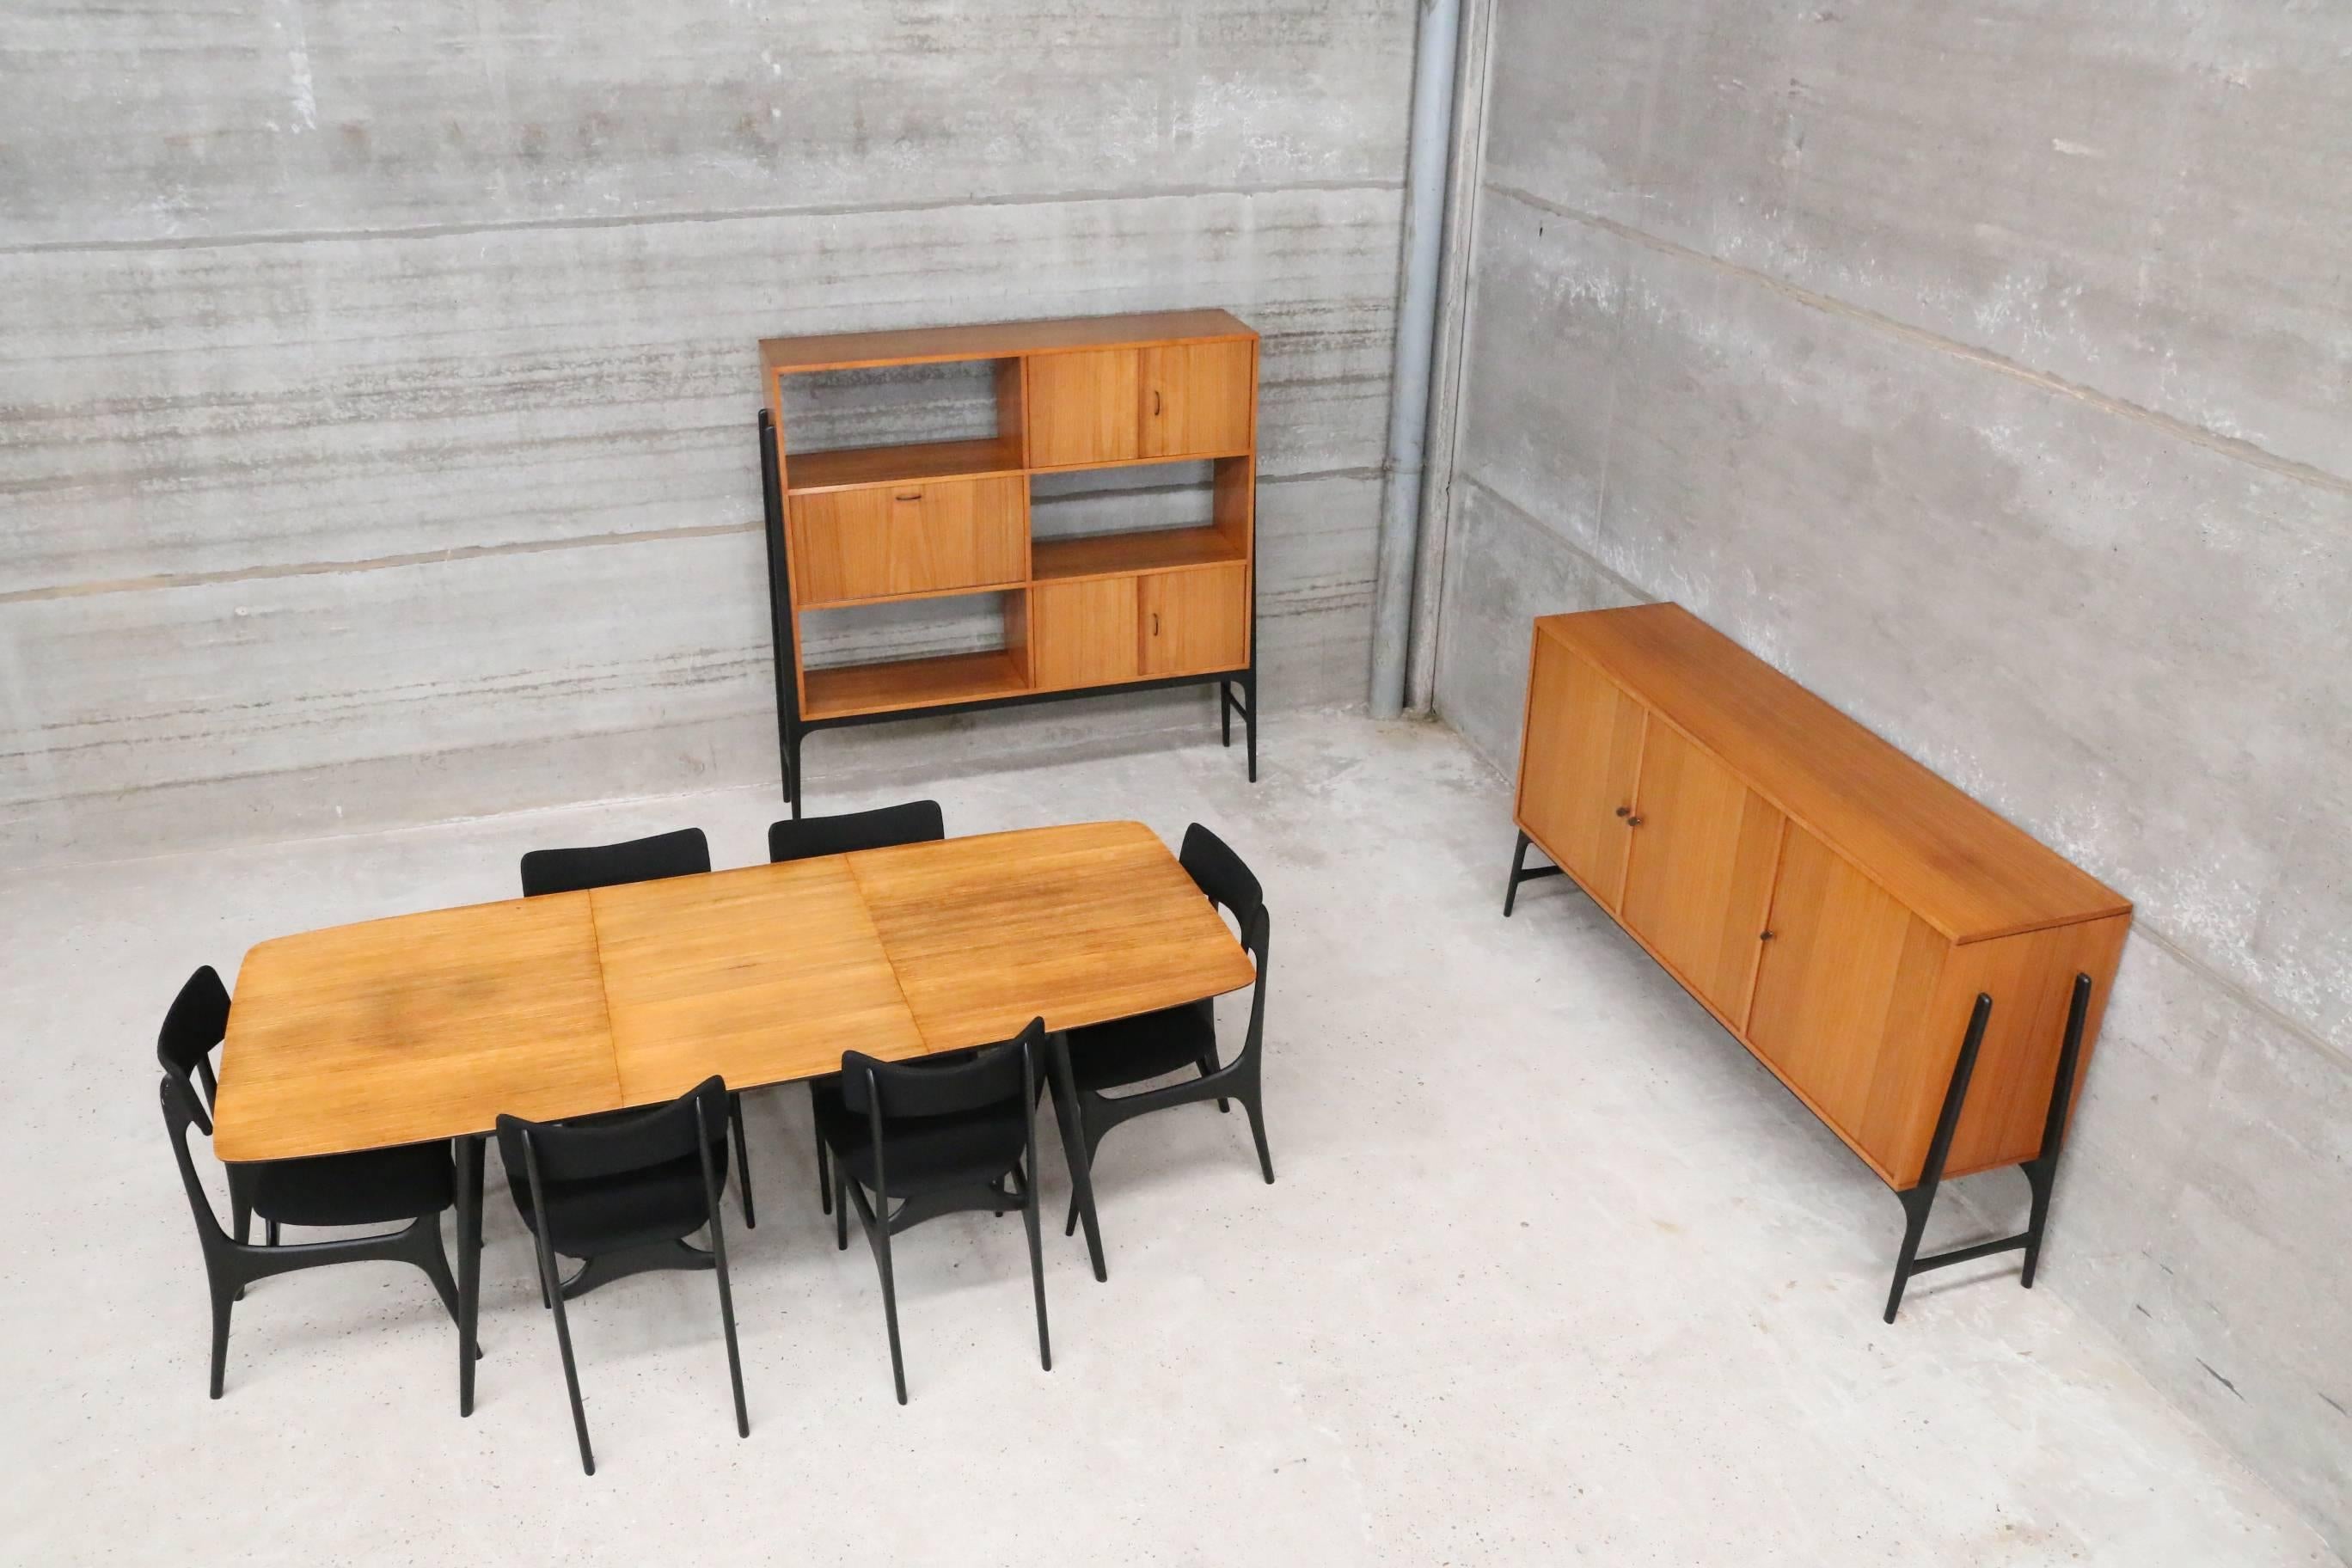 Rare Modernist Highboard by Belgian Architect and Designer Alfred Hendrickx 2